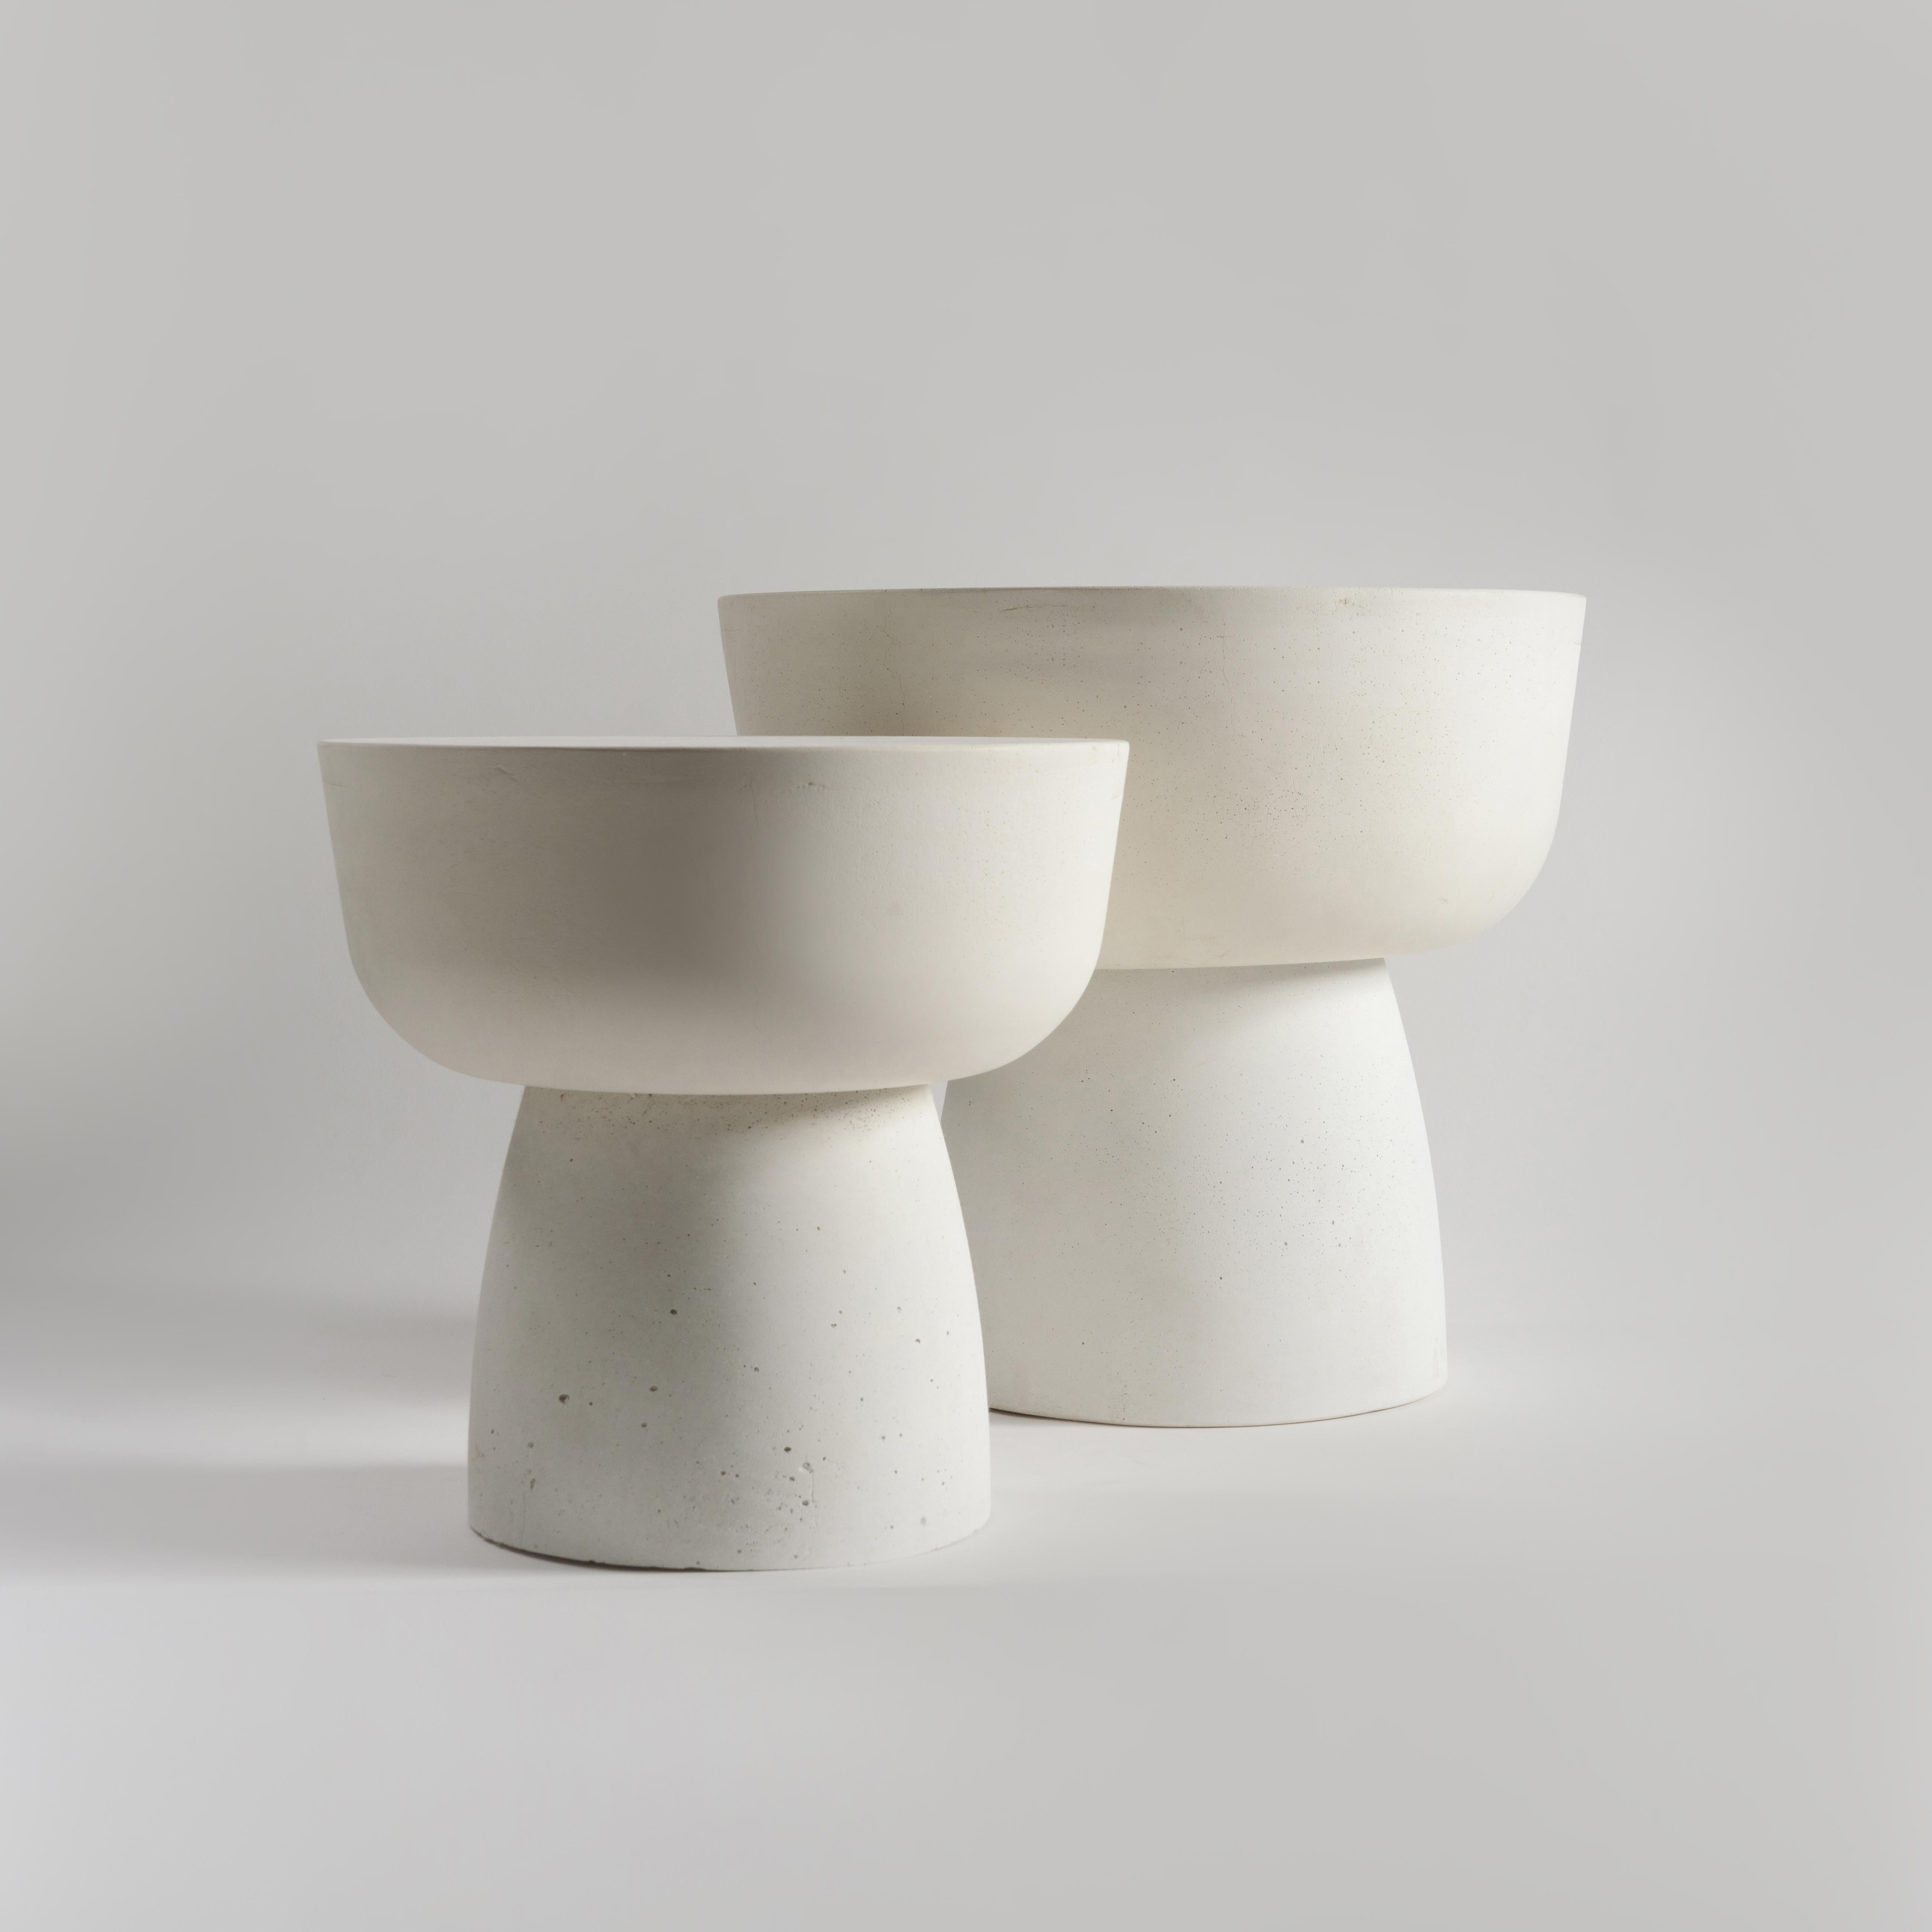 European 21st century contemporary sculptural handcrafted in white cast stone table set MUSHROOM SOLID size TALL and LOW.

The 'Mushroom Solid' table is part of our mono-material object collection. A rather sculptural piece of furniture, it is both